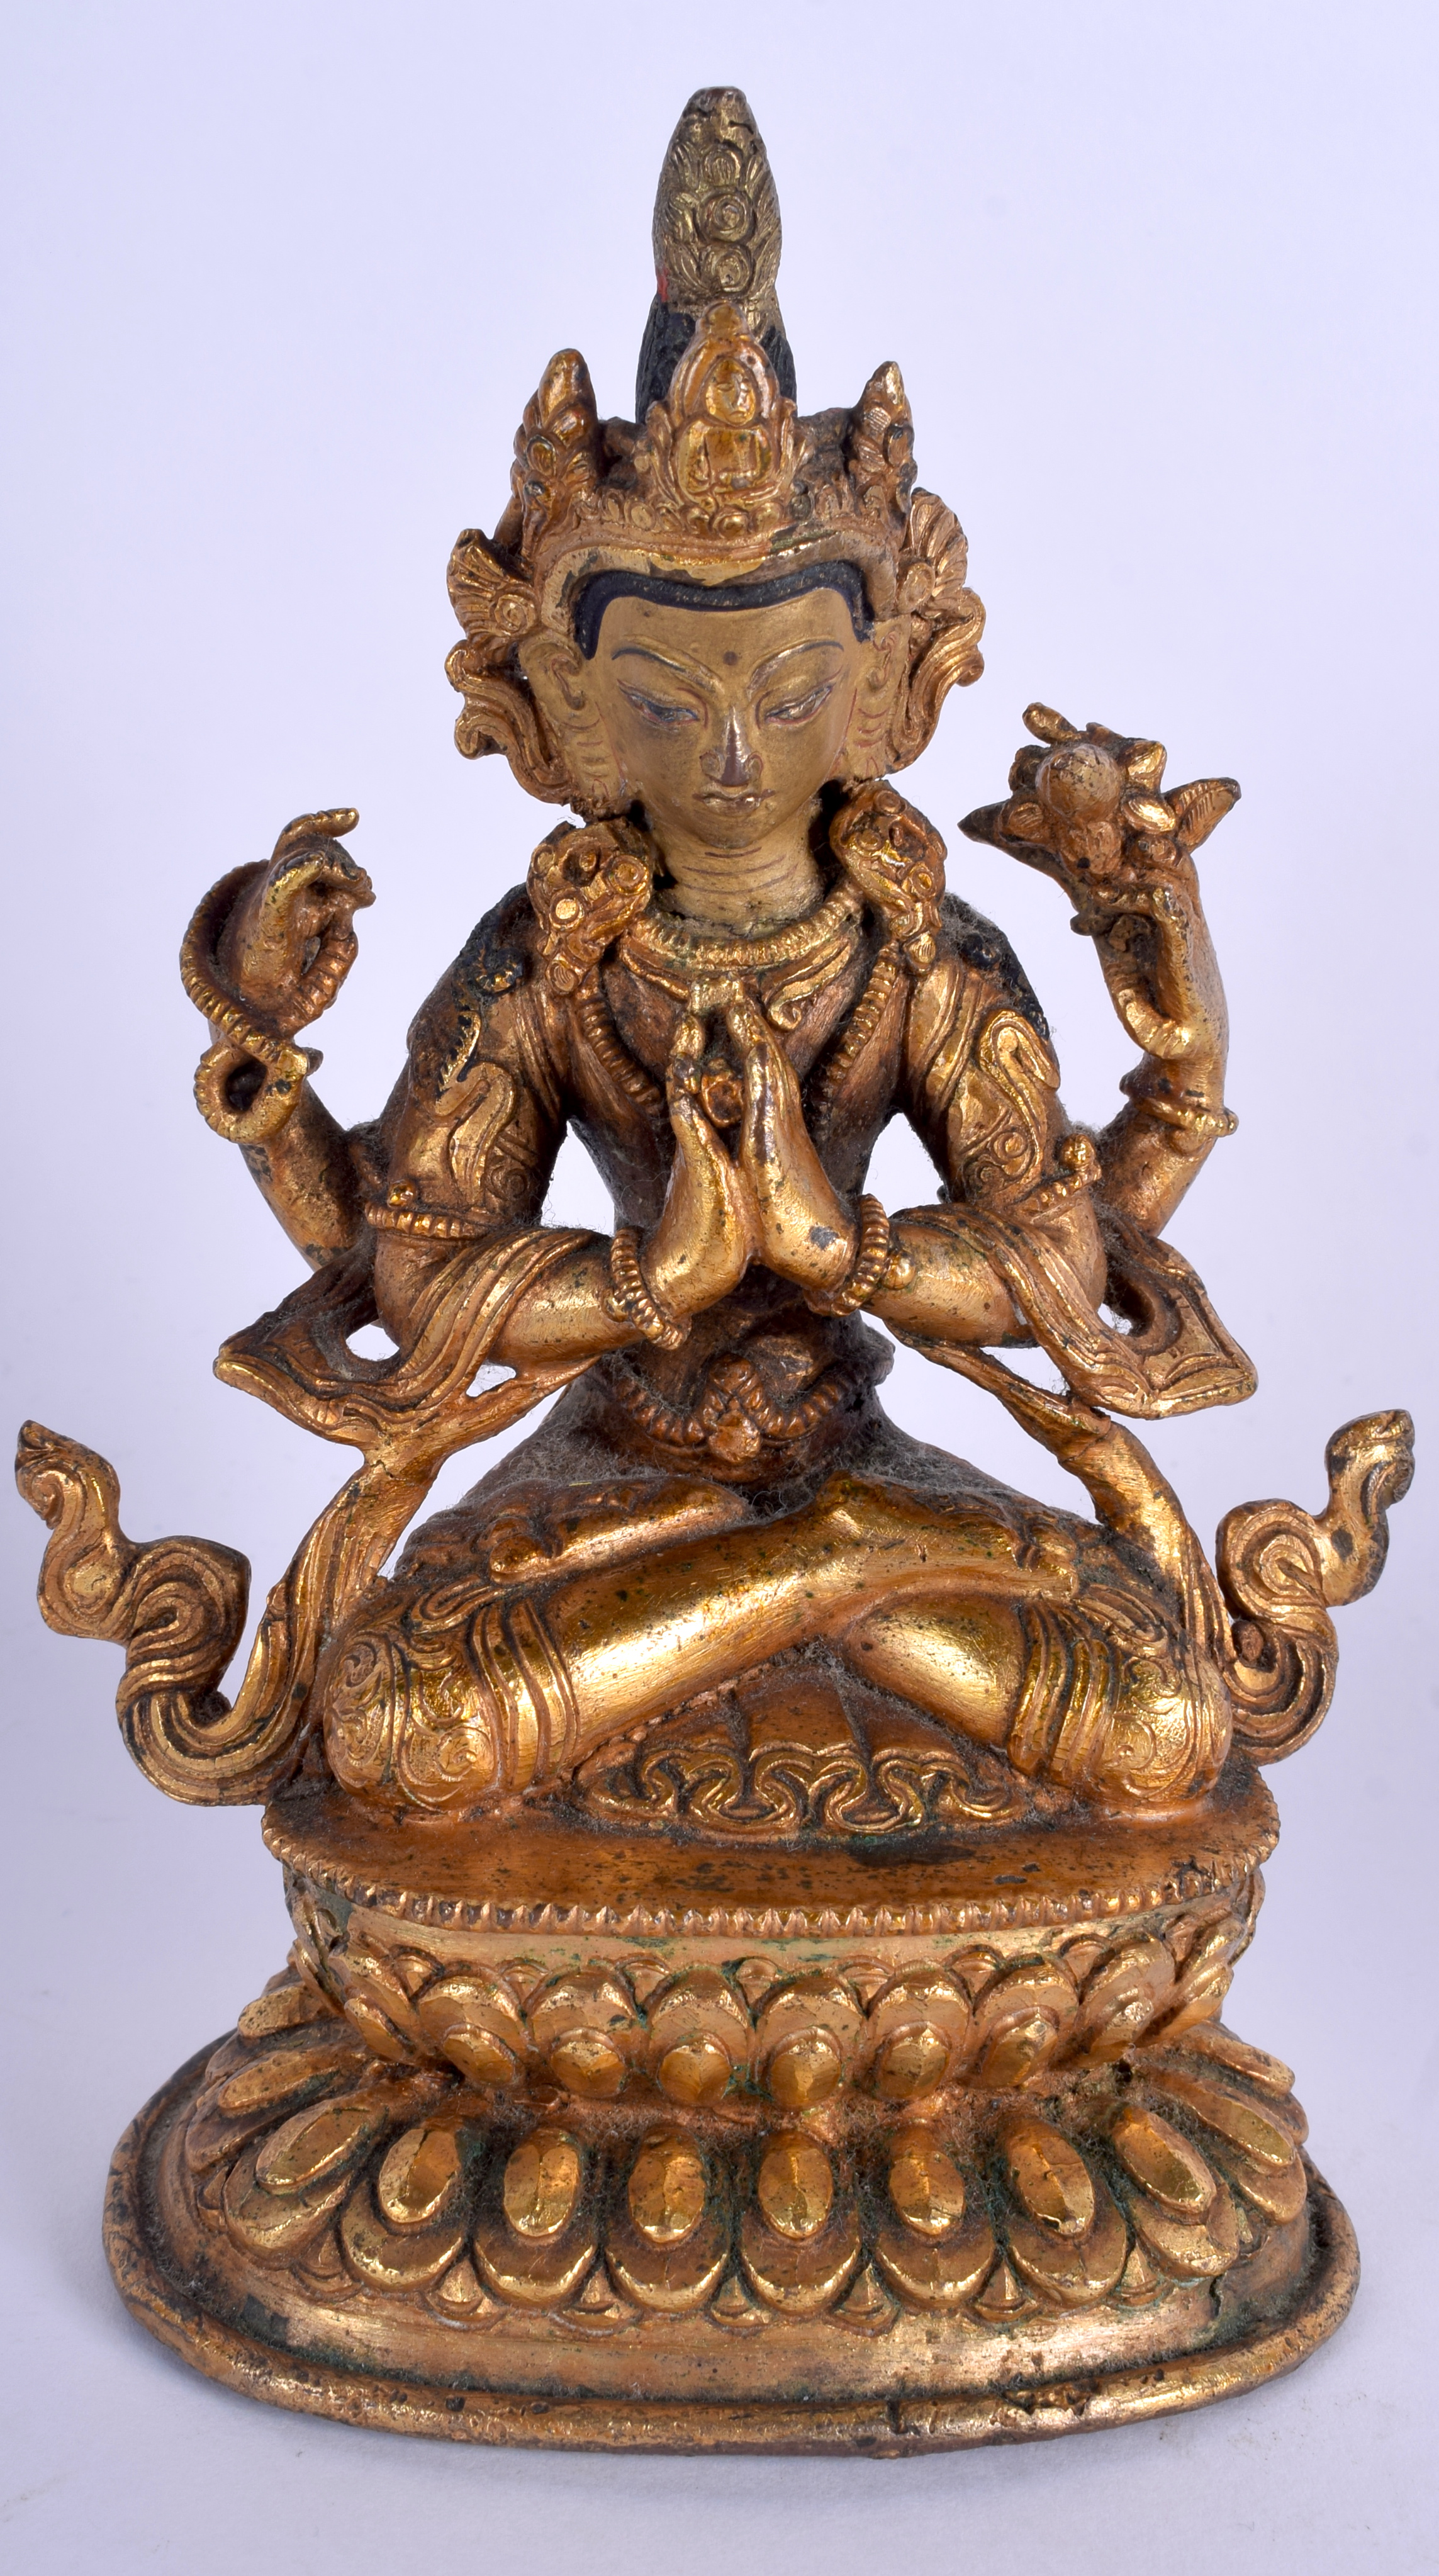 AN EARLY 20TH CENTURY CHINESE TIBETAN GILT BRONZE FIGURE OF A BUDDHA modelled with hands clasped up